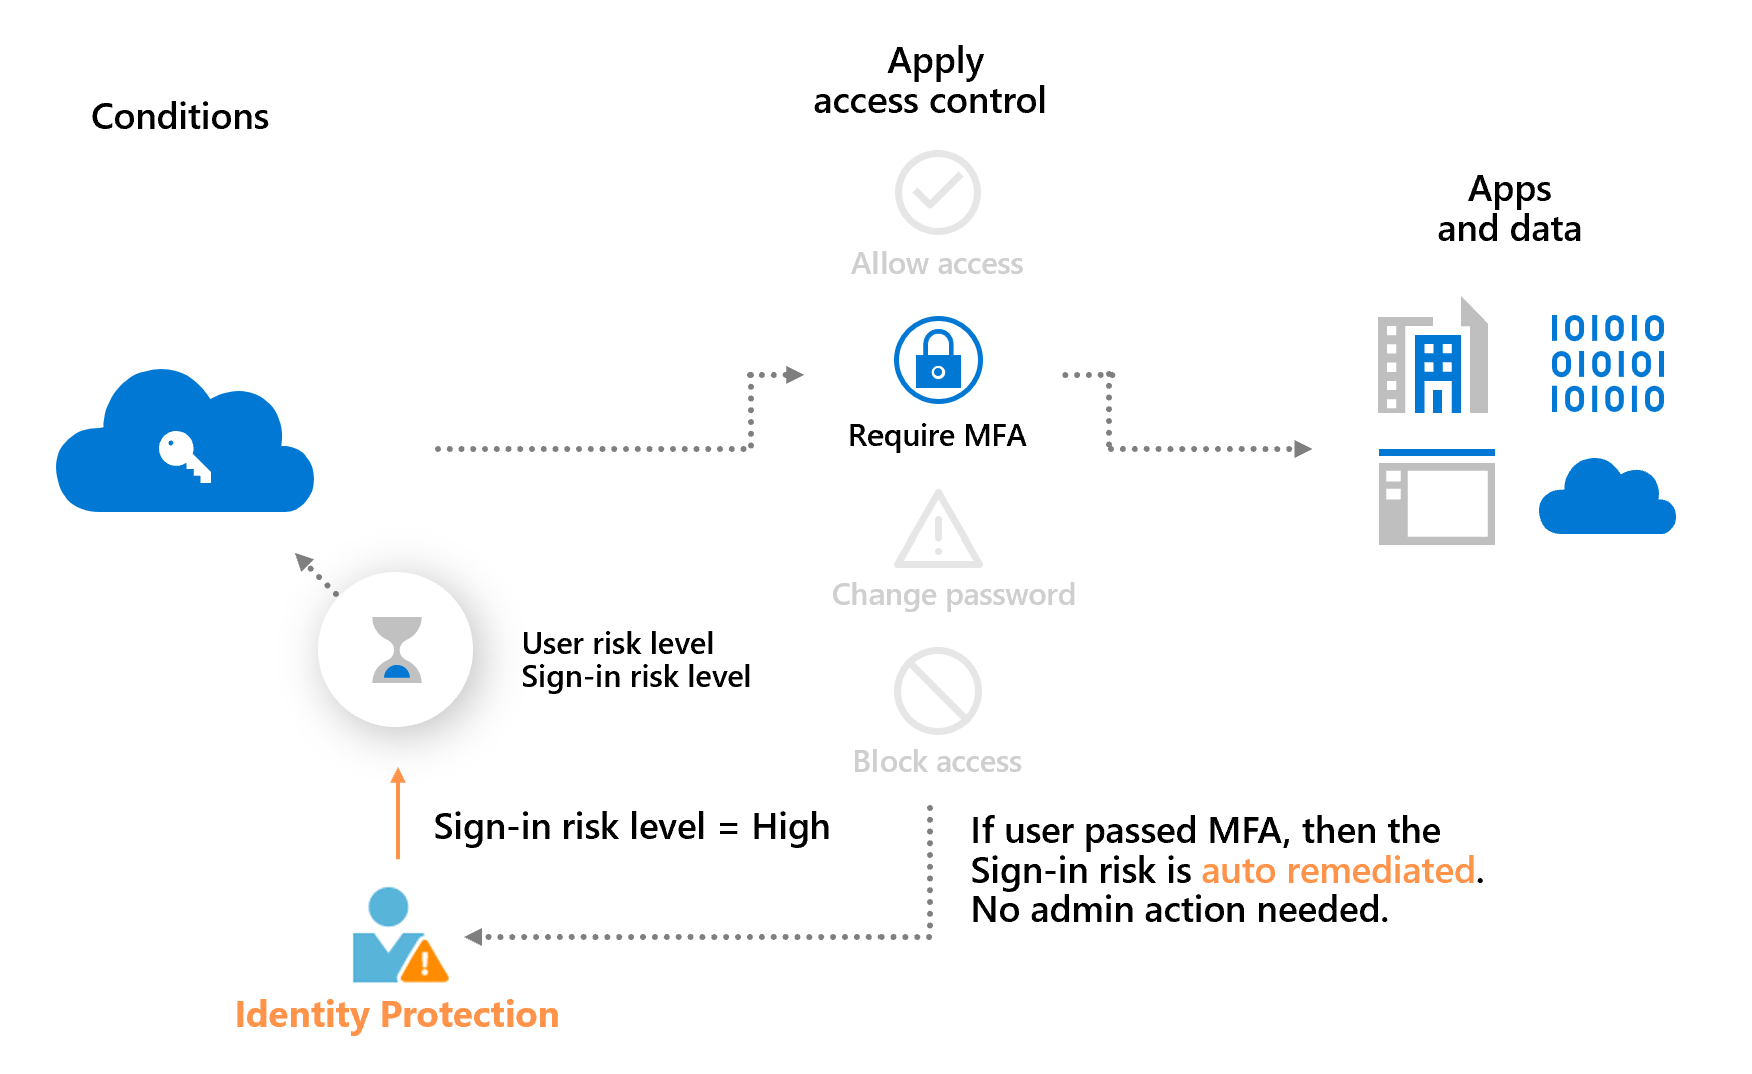 Seller Insurance Requirements - Azure Risk - Business